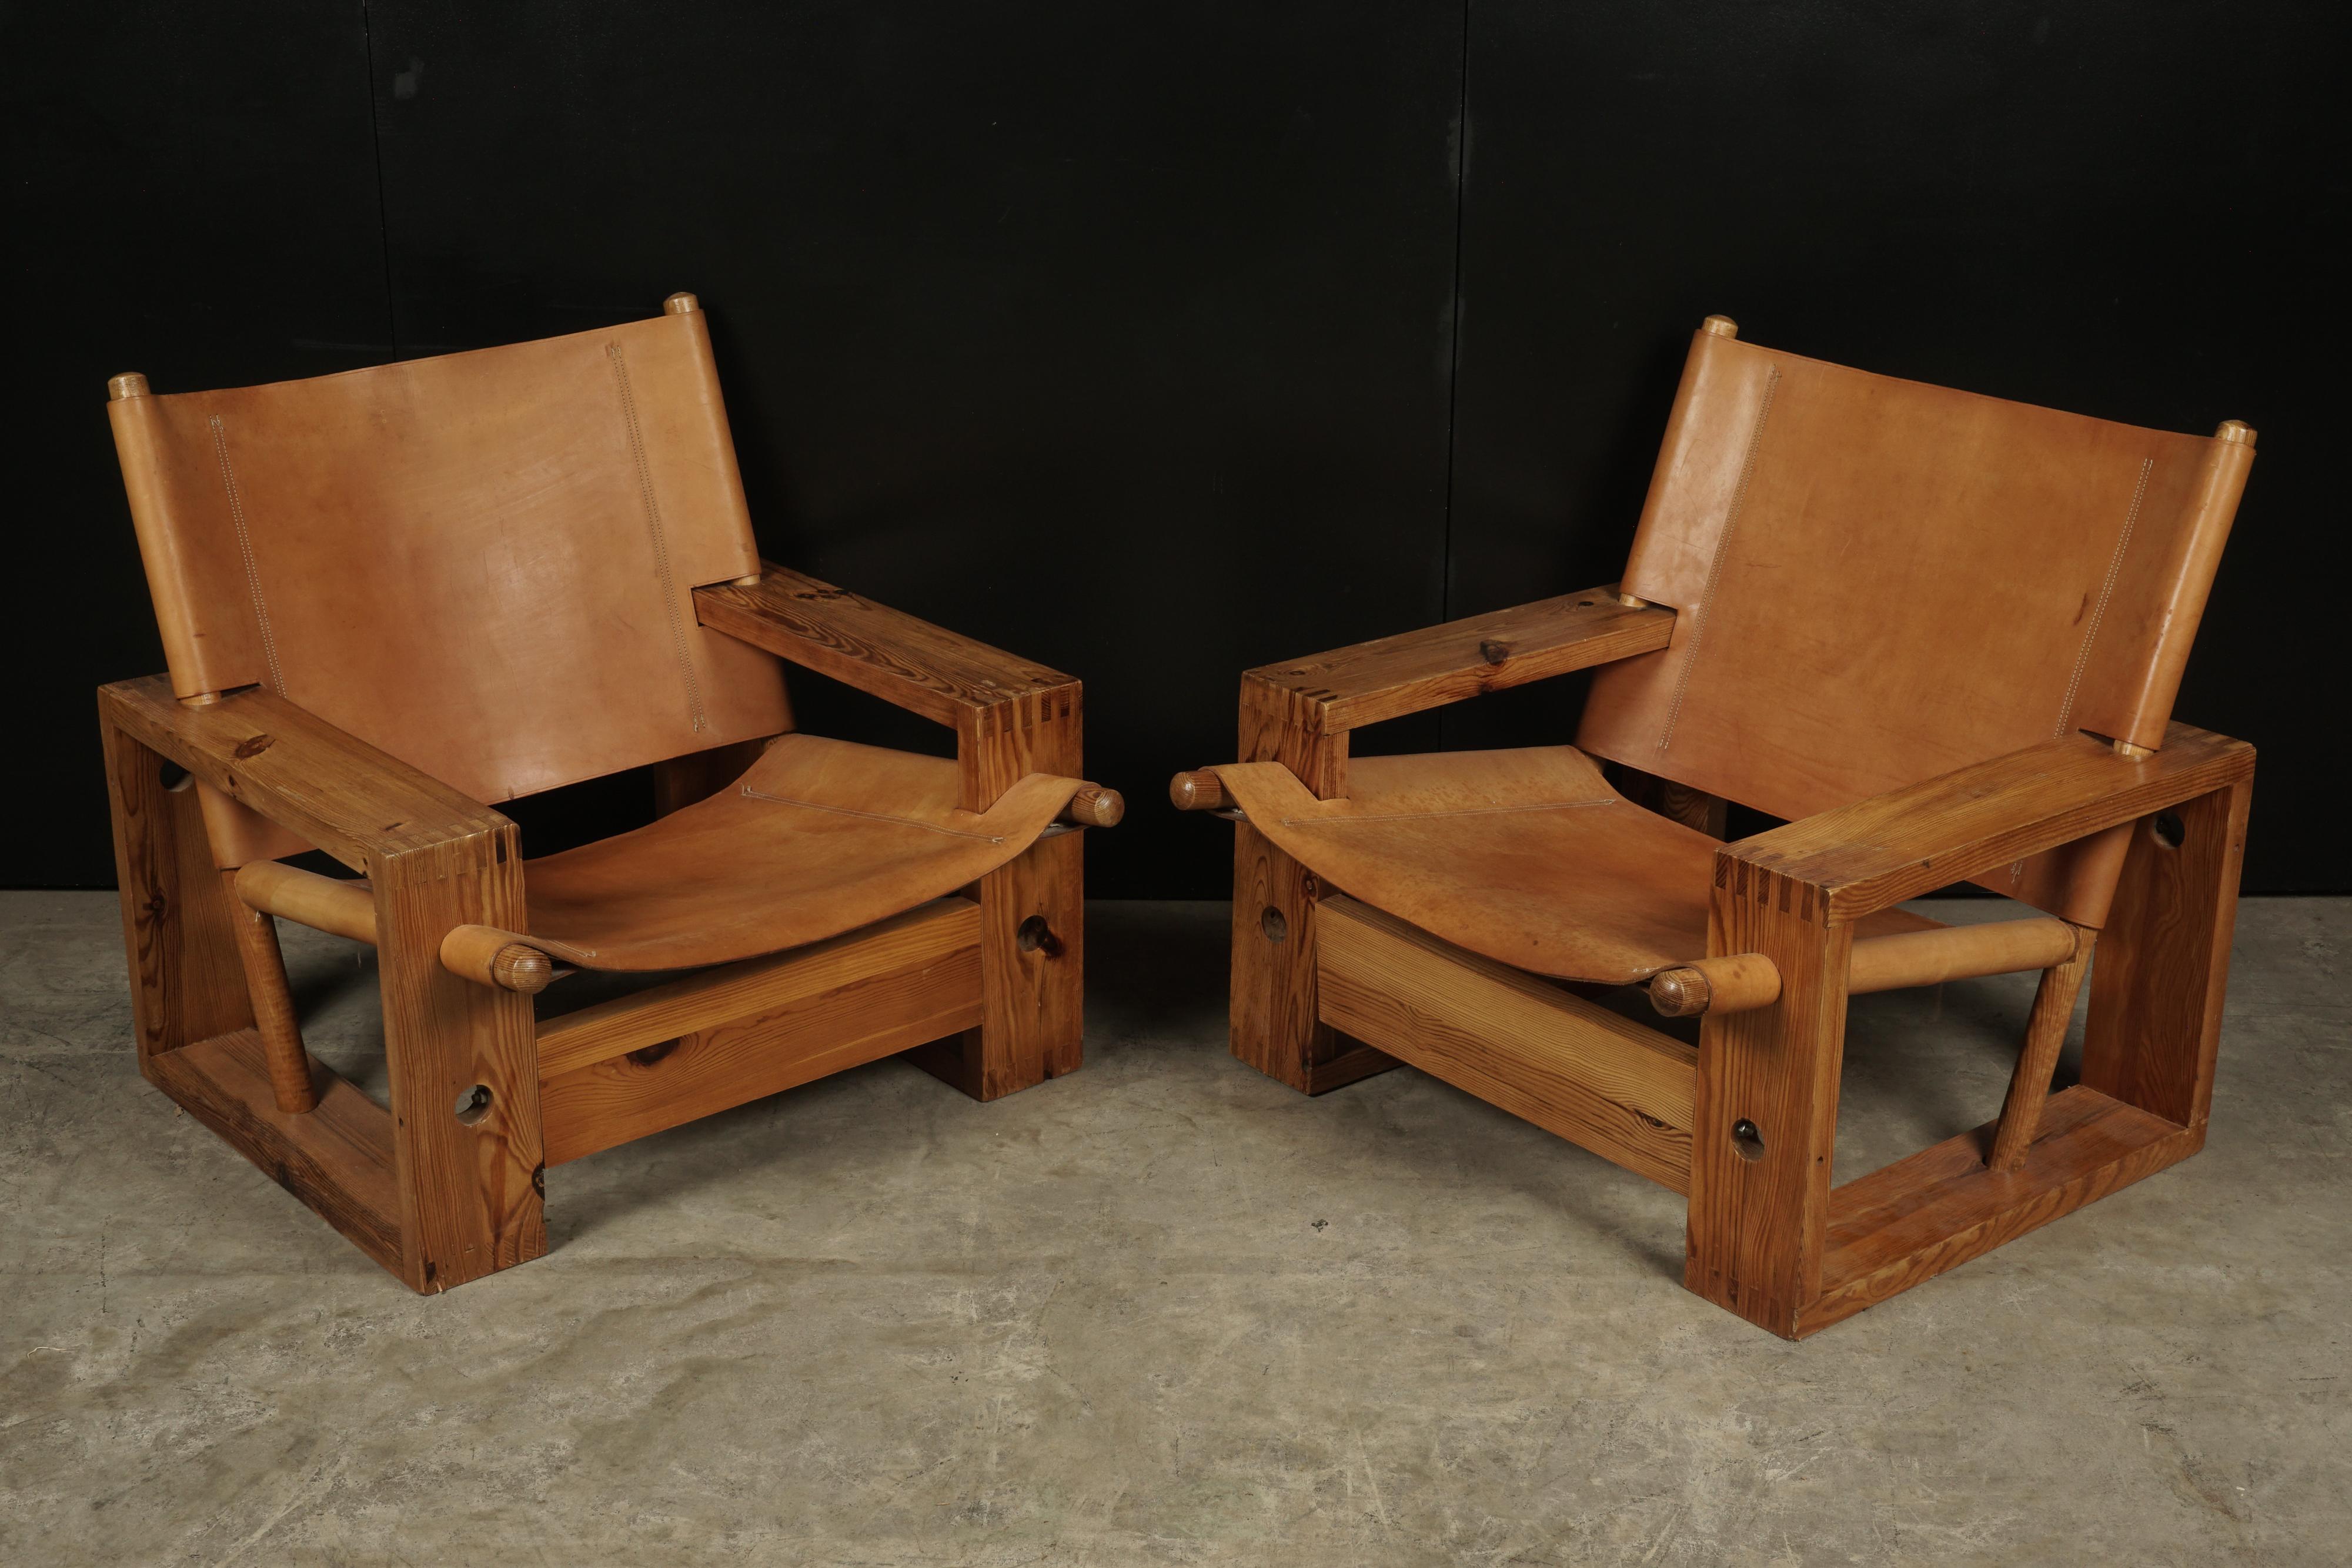 Rare pair of vintage dutch easy chairs designed by Ate Van Apeldoorn, 1970s. Solid pine construction with stretched cognac saddle leather.